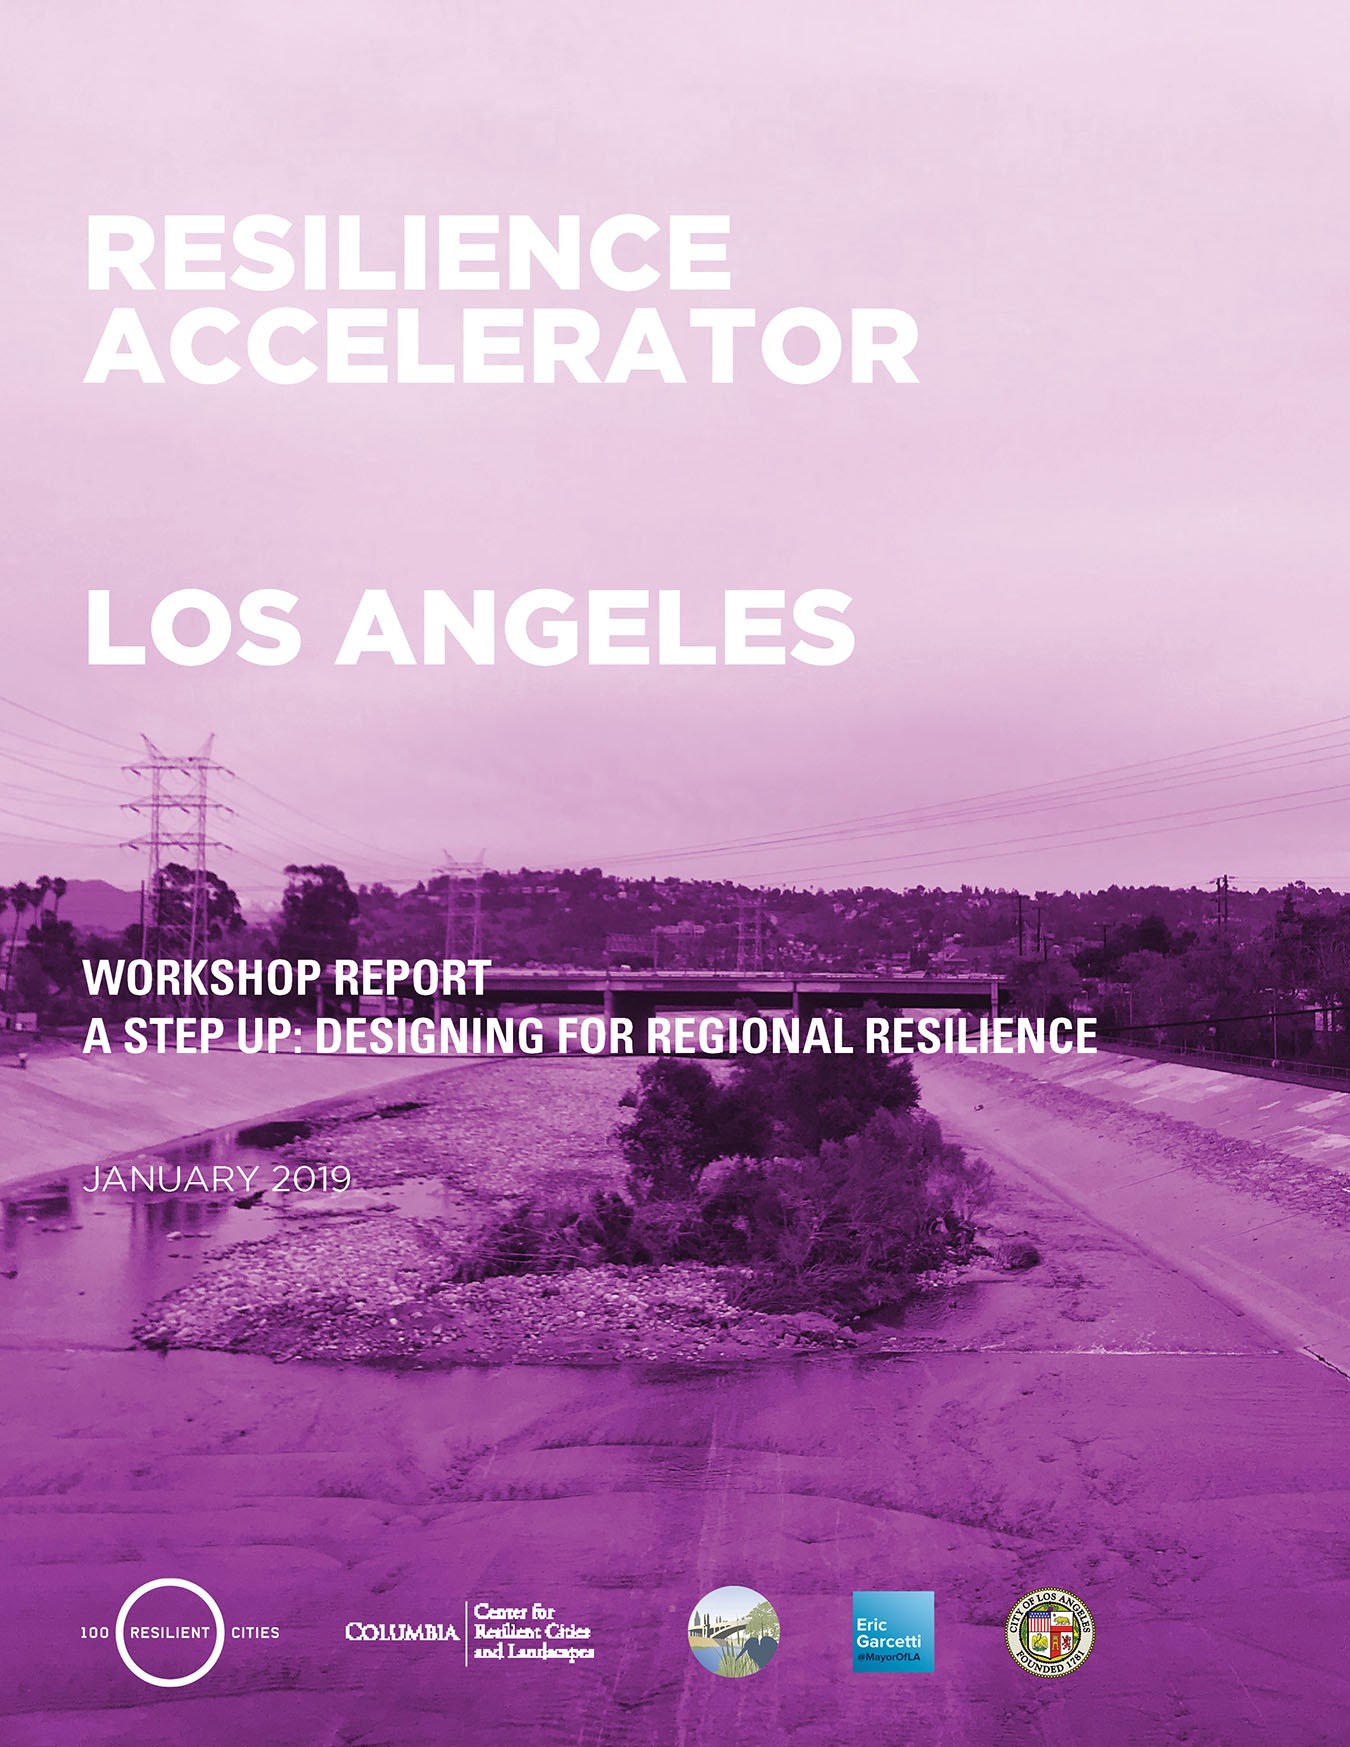 Los Angeles Resilience Accelerator